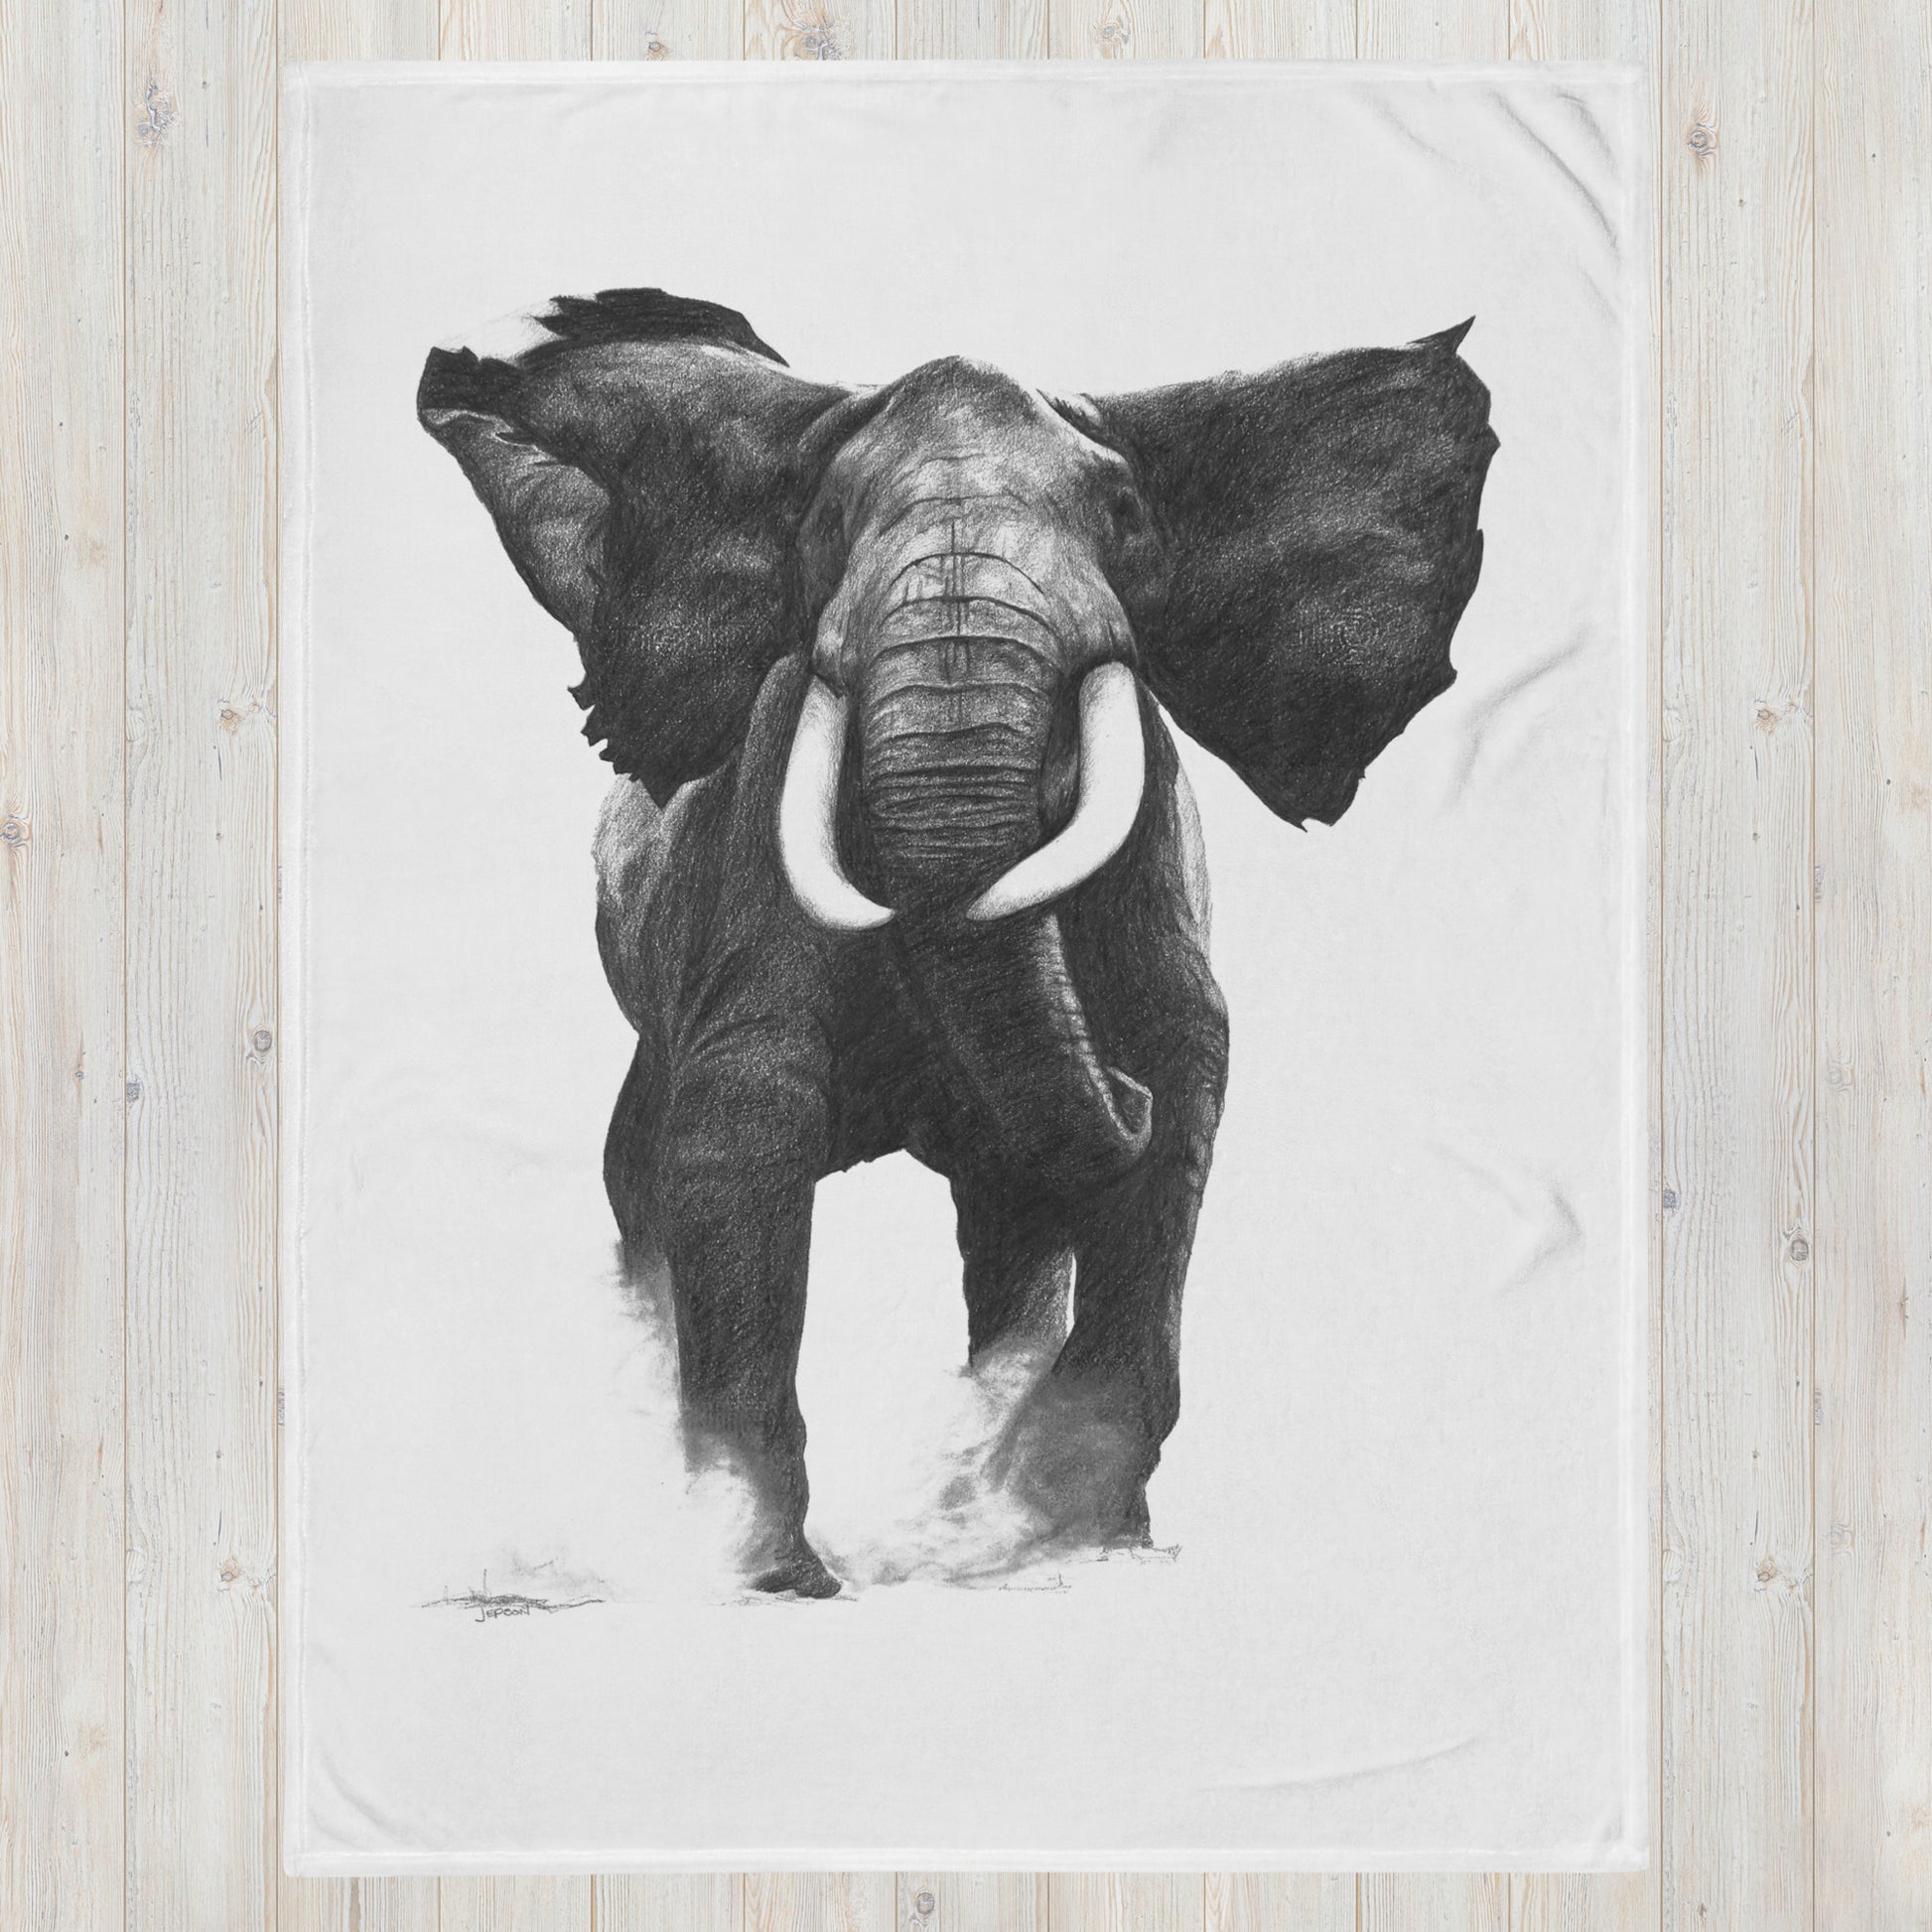 These "Elephant Throw Blanket" are from a drawing of mine created with a graphite pencil. It has been digitally optimized and transferred to a 100% Polyester throw blanket.